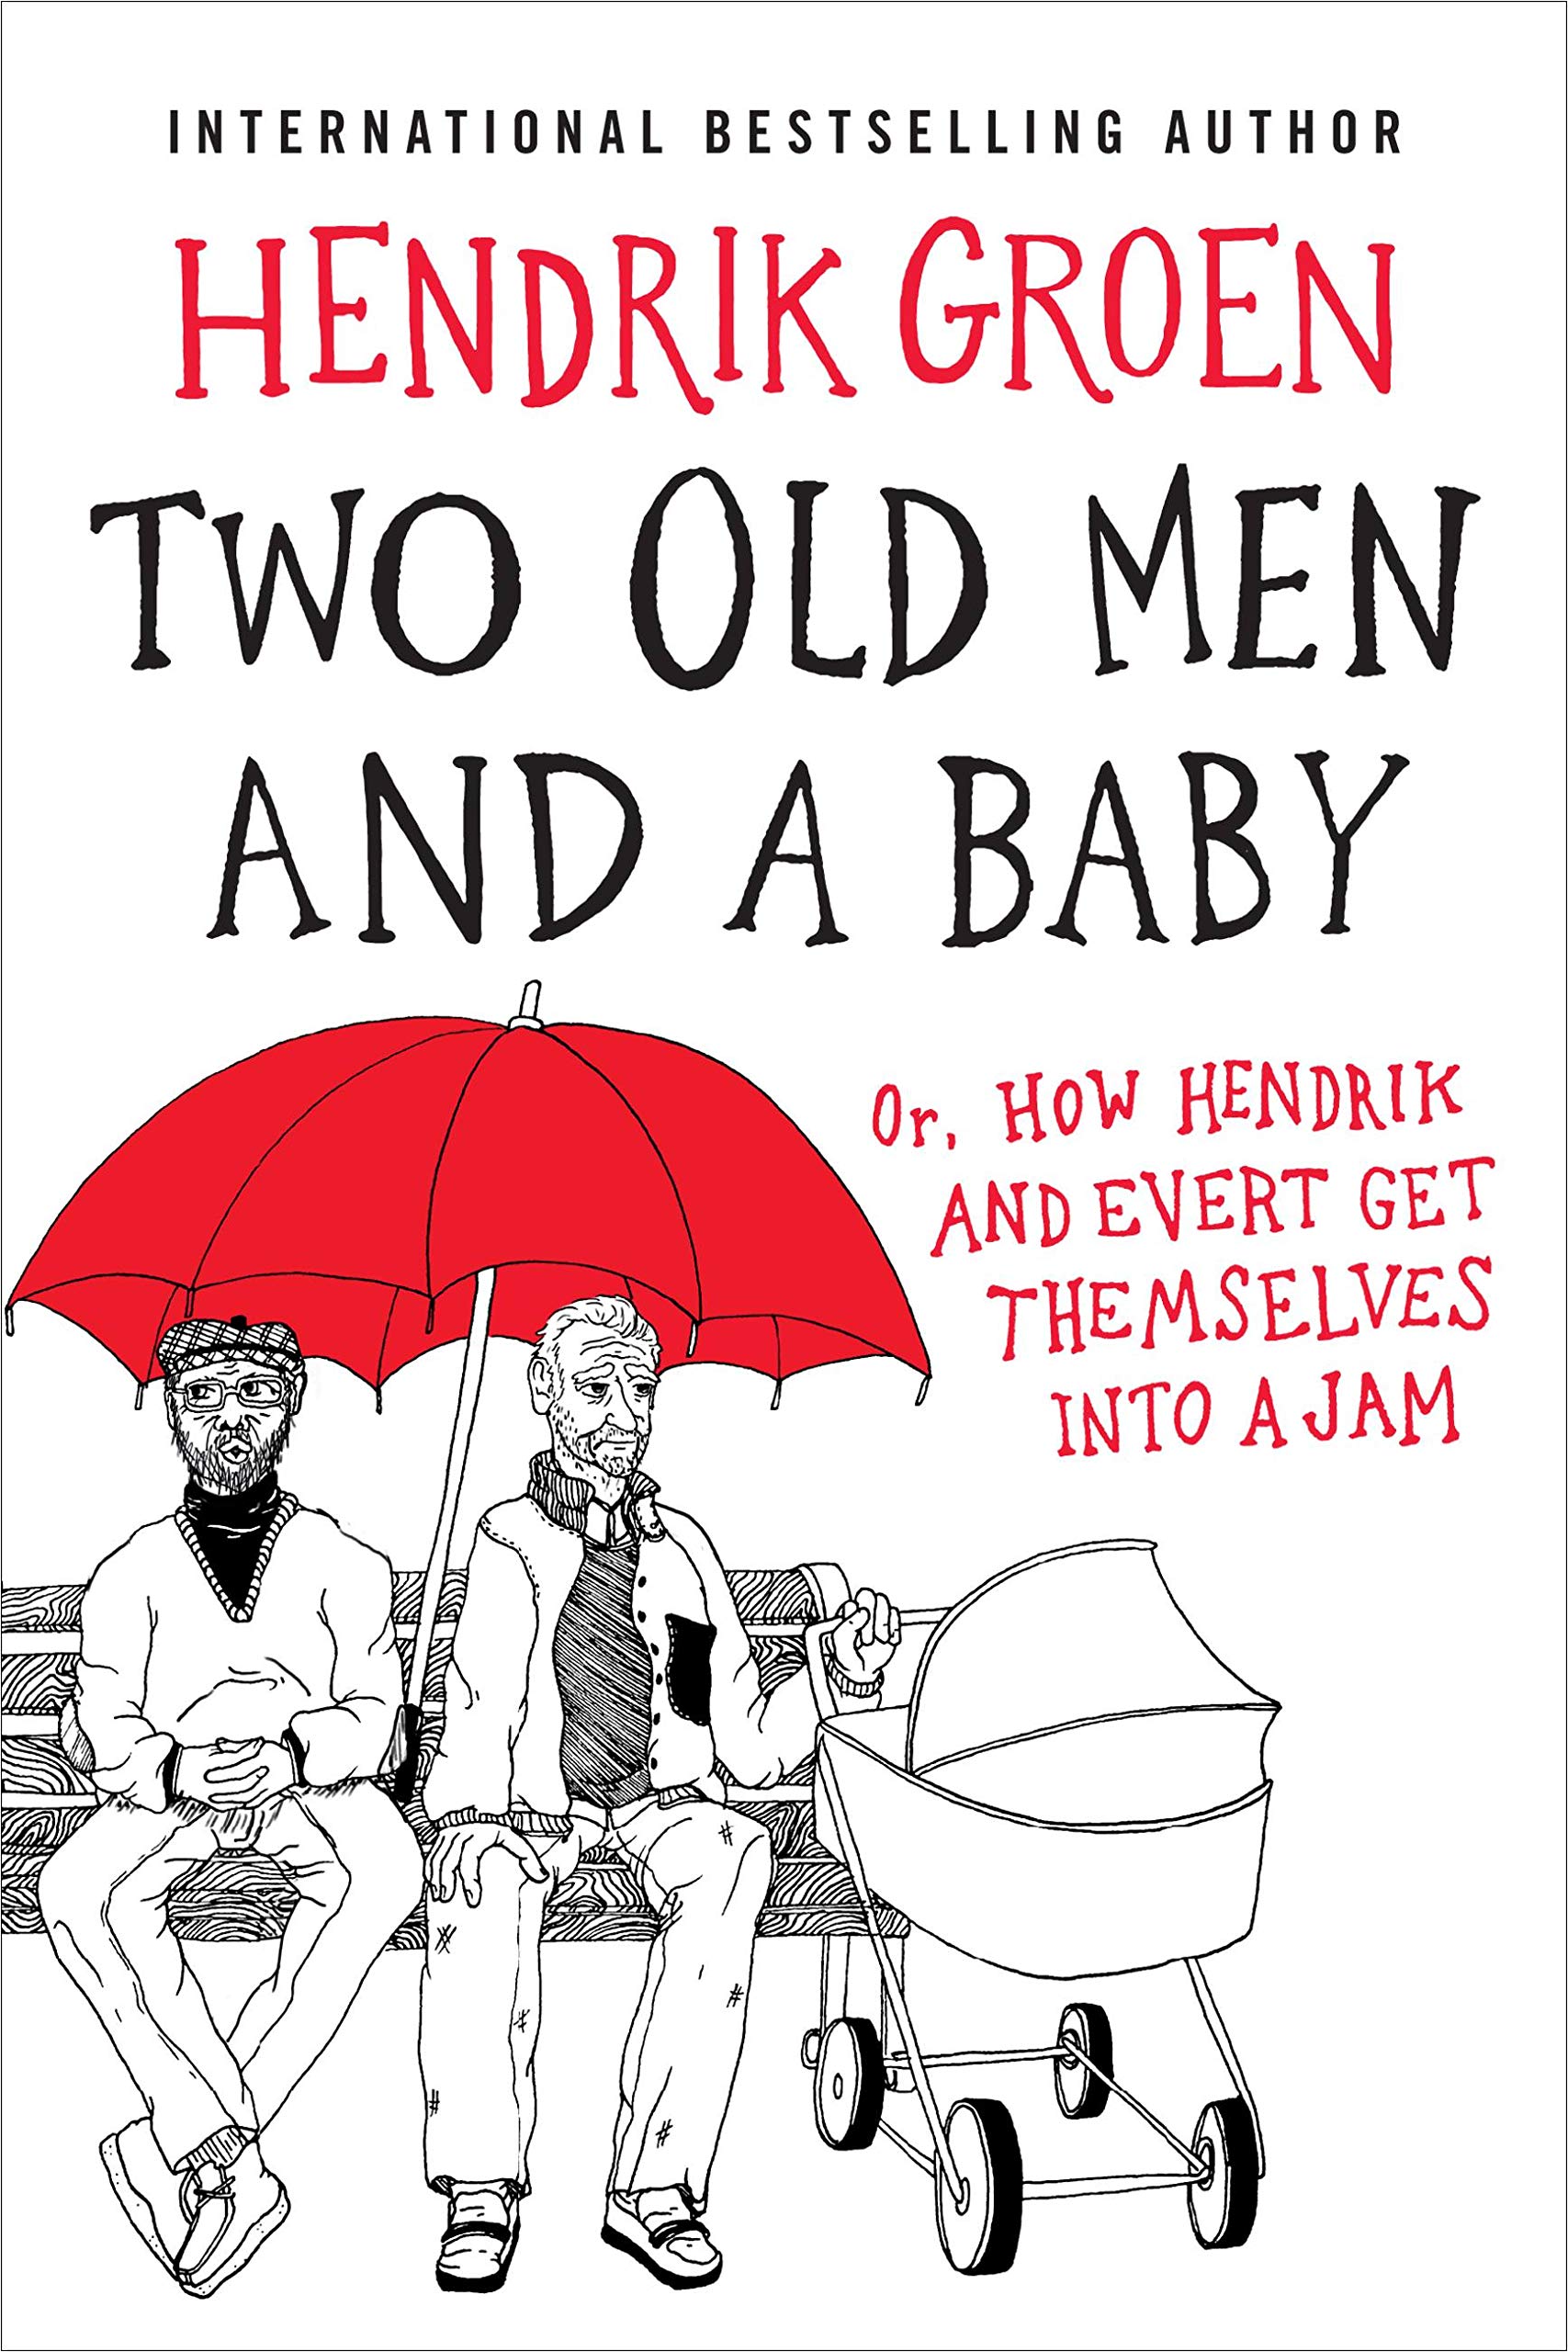 Two Old Men and a Baby: Or, How Hendrik and Evert Get Themselves Into a Jam by Hendrik Groen